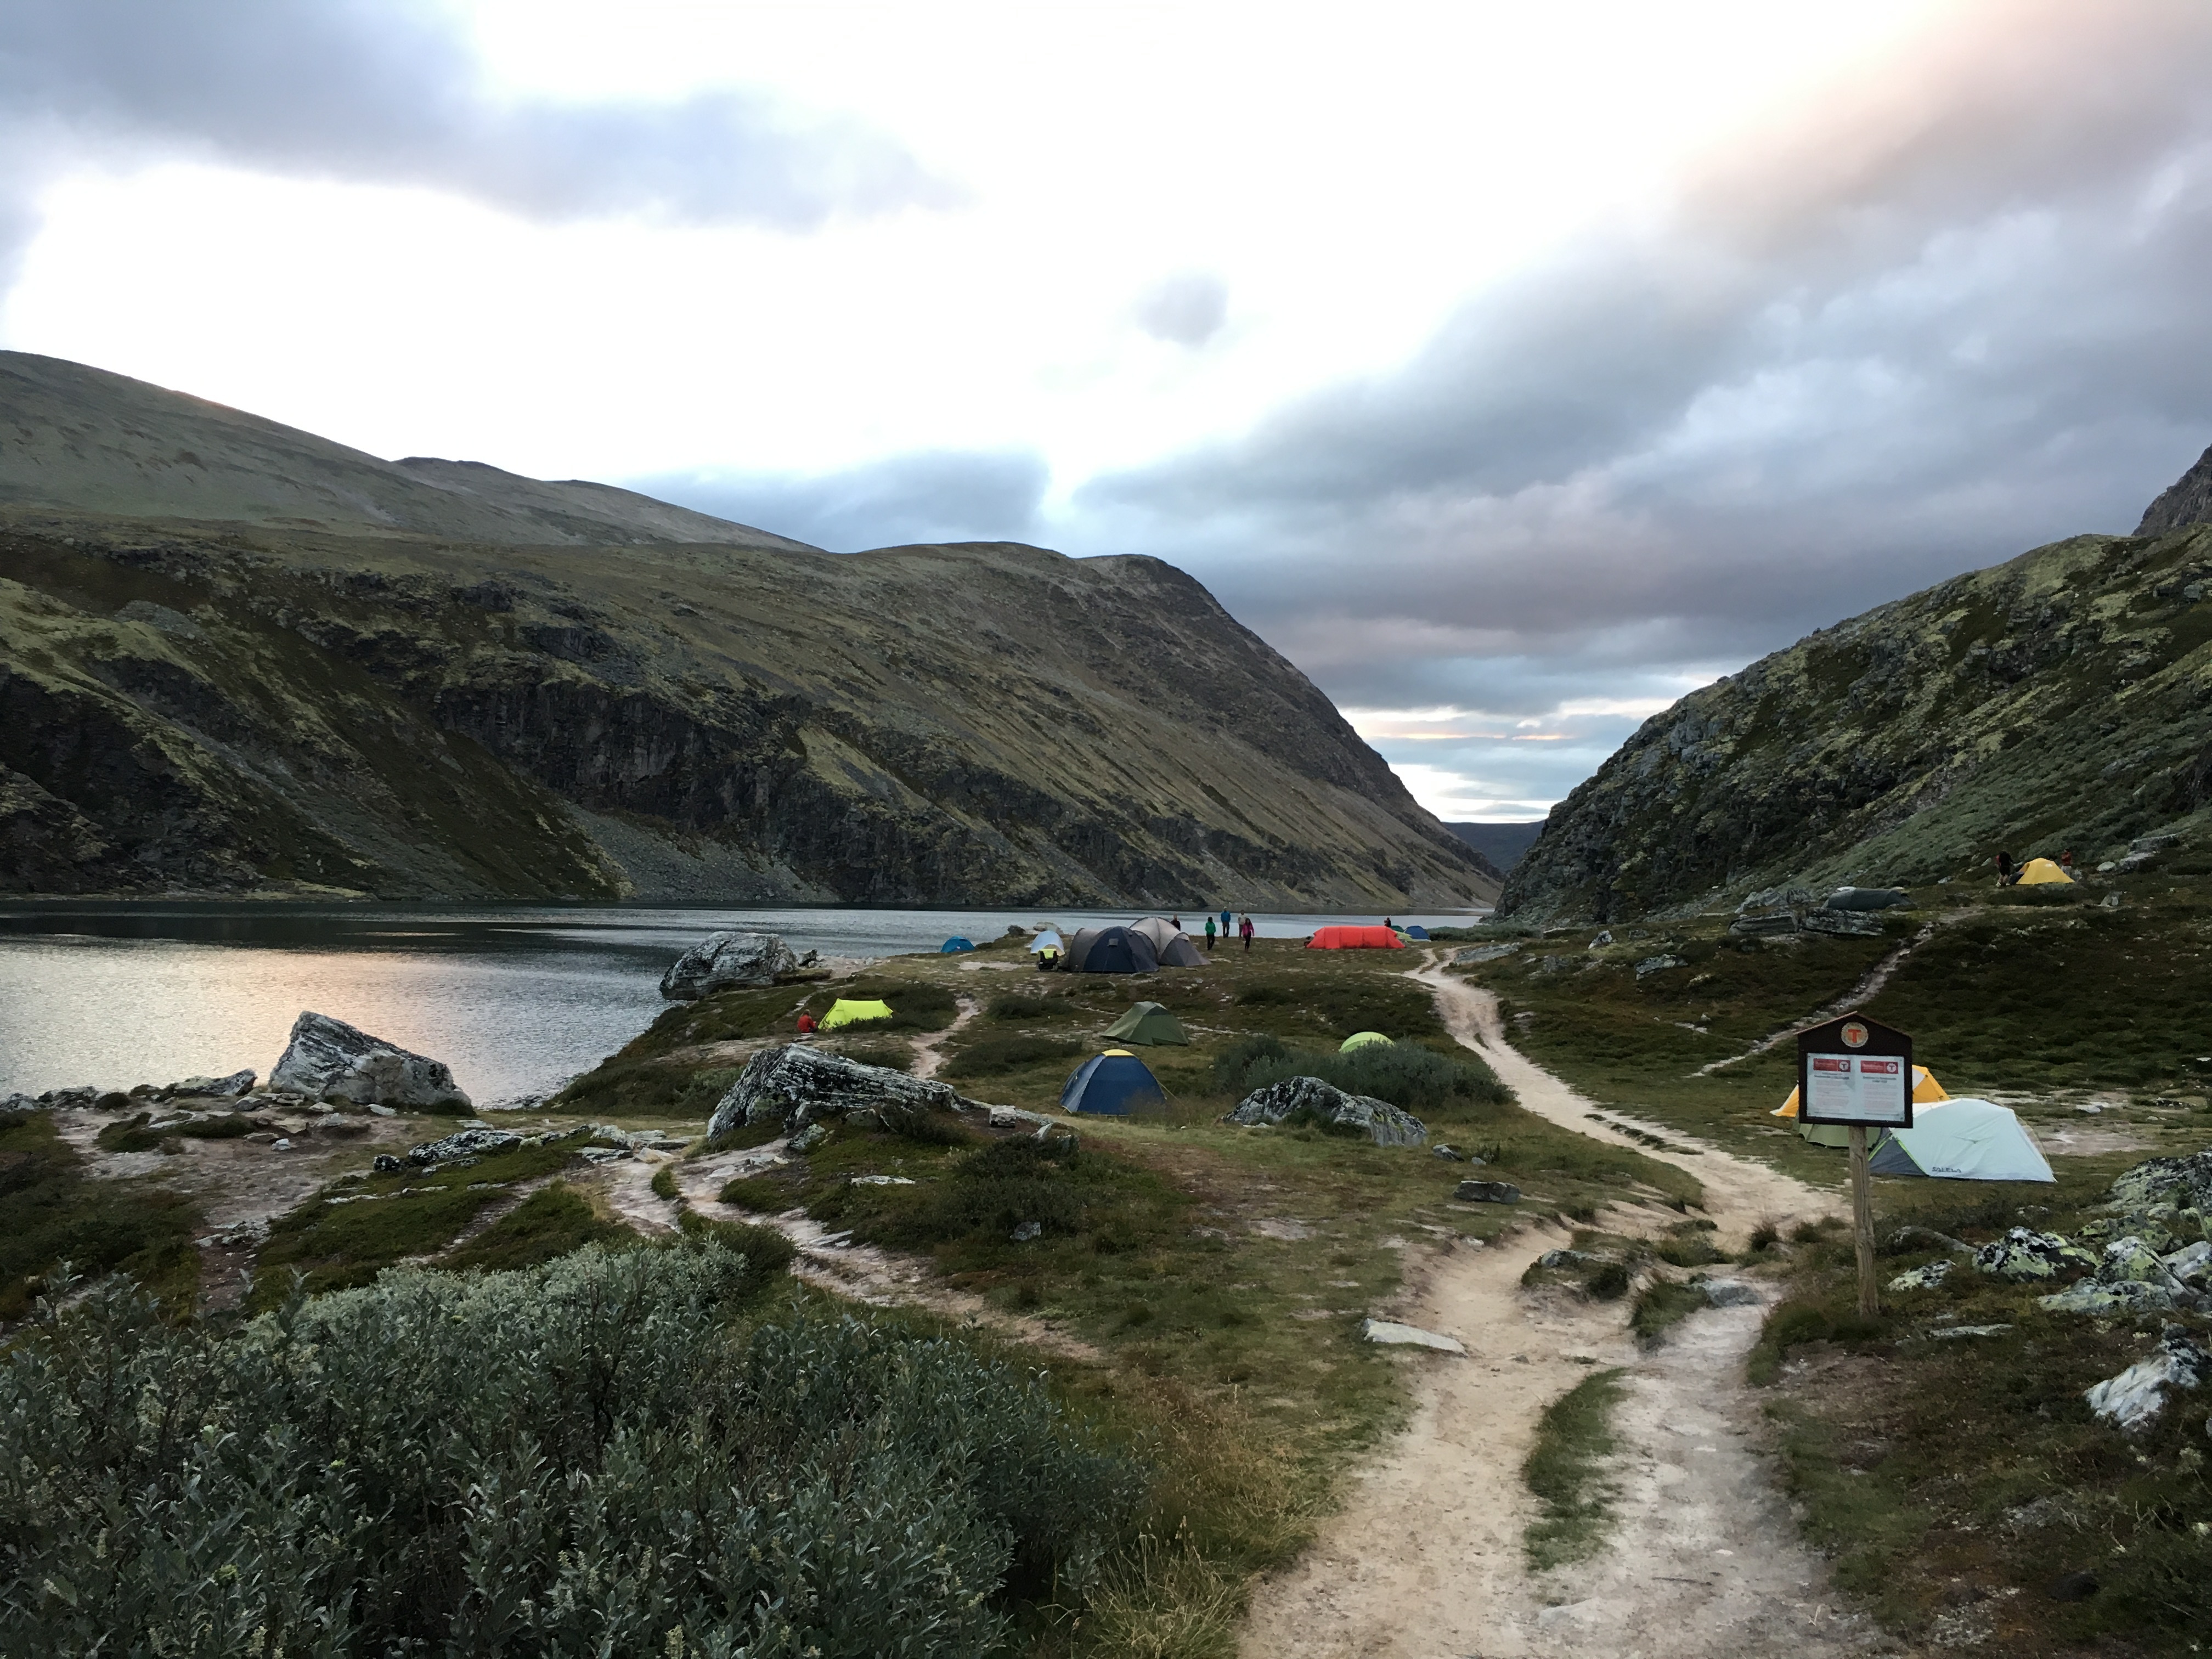 Setting up camp near a hut allows you to use their facilities for a much lower fee (Rondvassbu-Rondane)